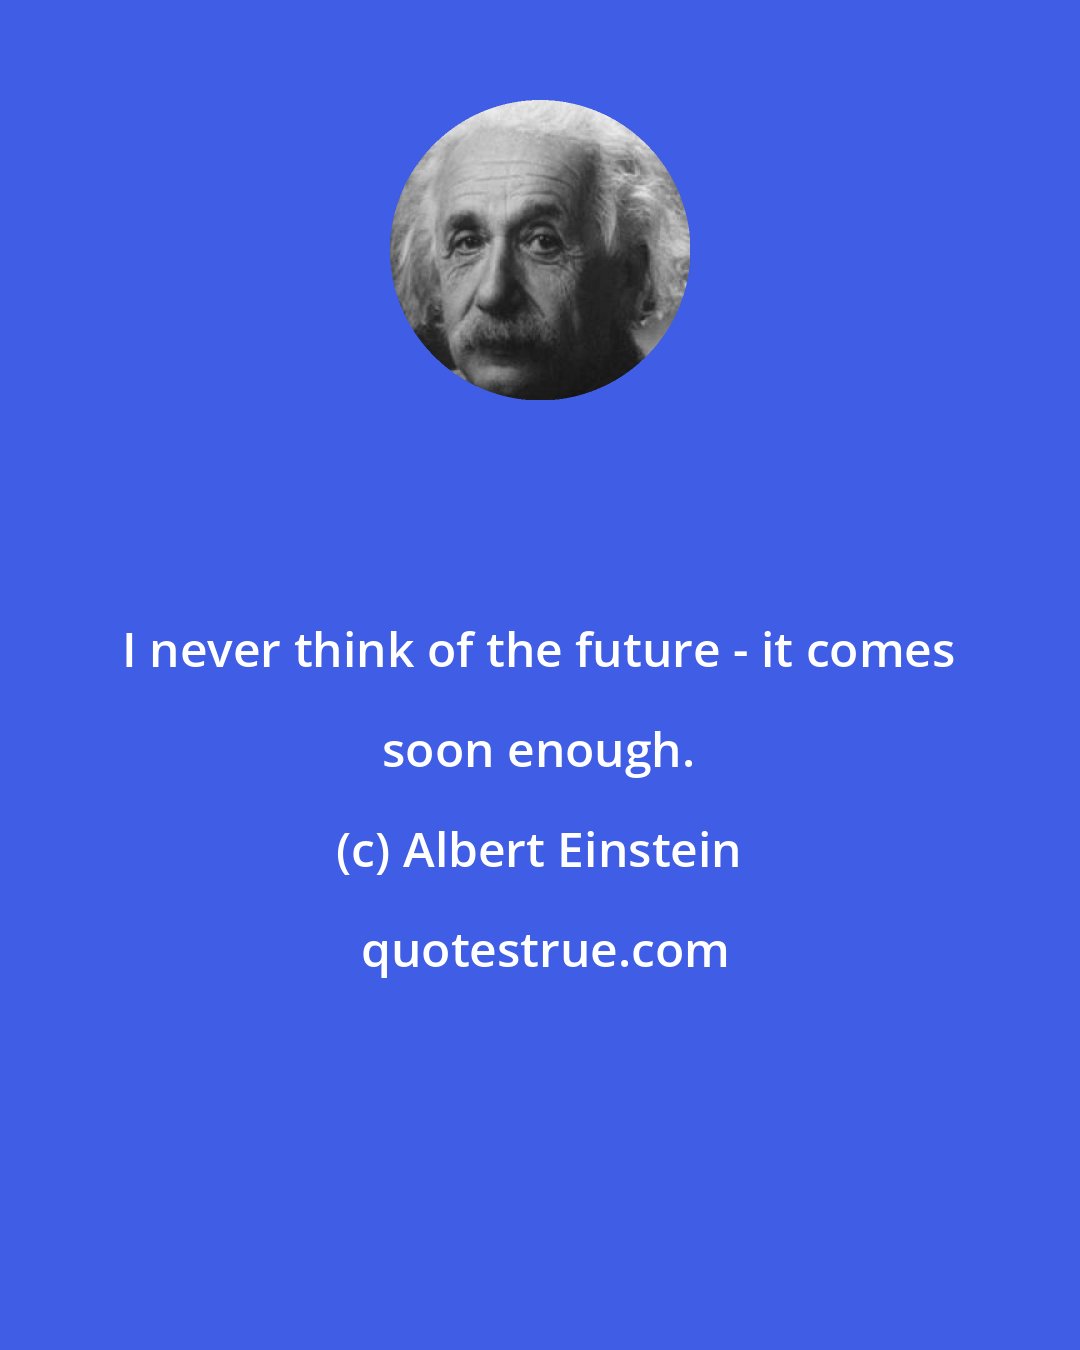 Albert Einstein: I never think of the future - it comes soon enough.